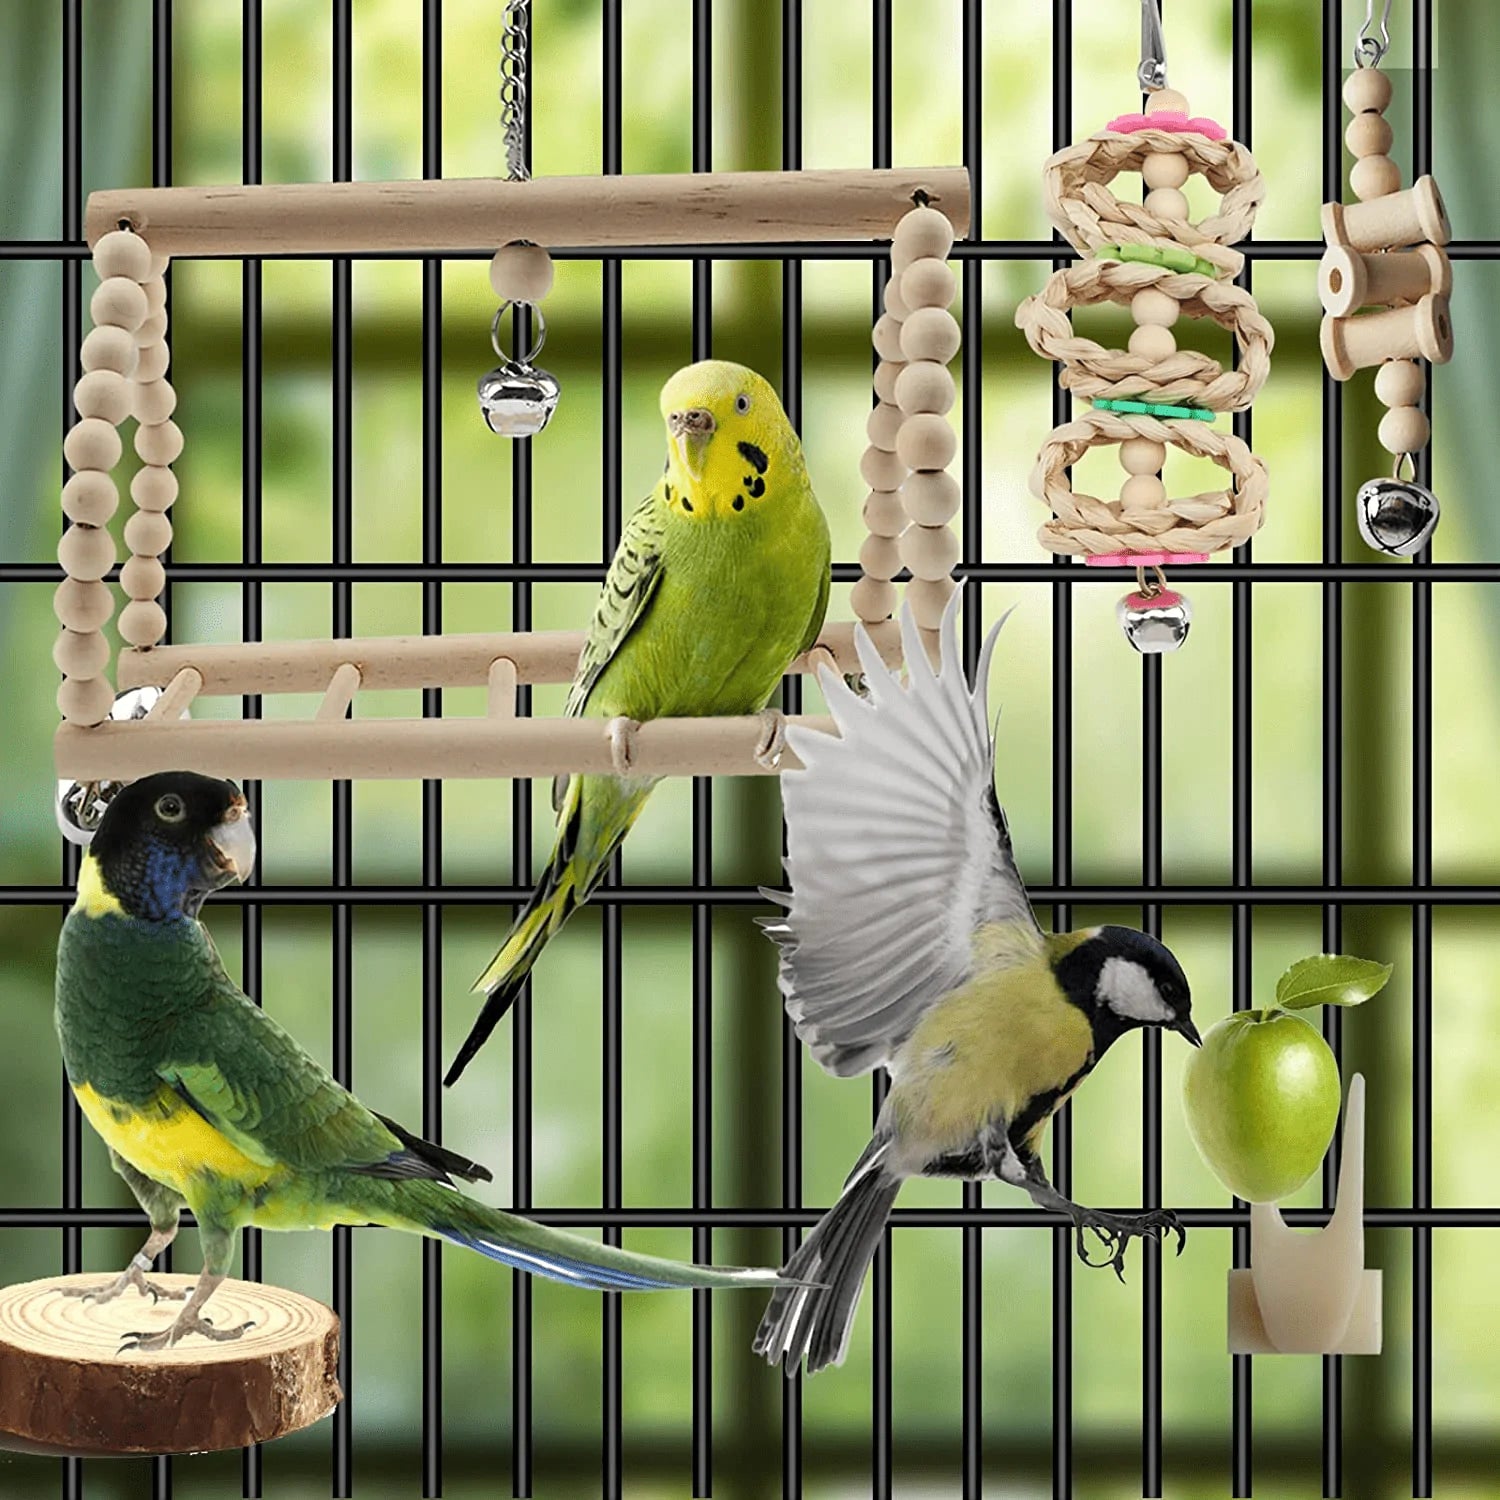 Pietypet Bird Parrot Toys for Cages, Colorful Chewing Hanging Swing Pet Bird Toy with Bells, Wooden Ladder Hammock, Rope Perch, Birdcage Stands for Parakeets Cockatiels, Conures, Macaw, Parrot